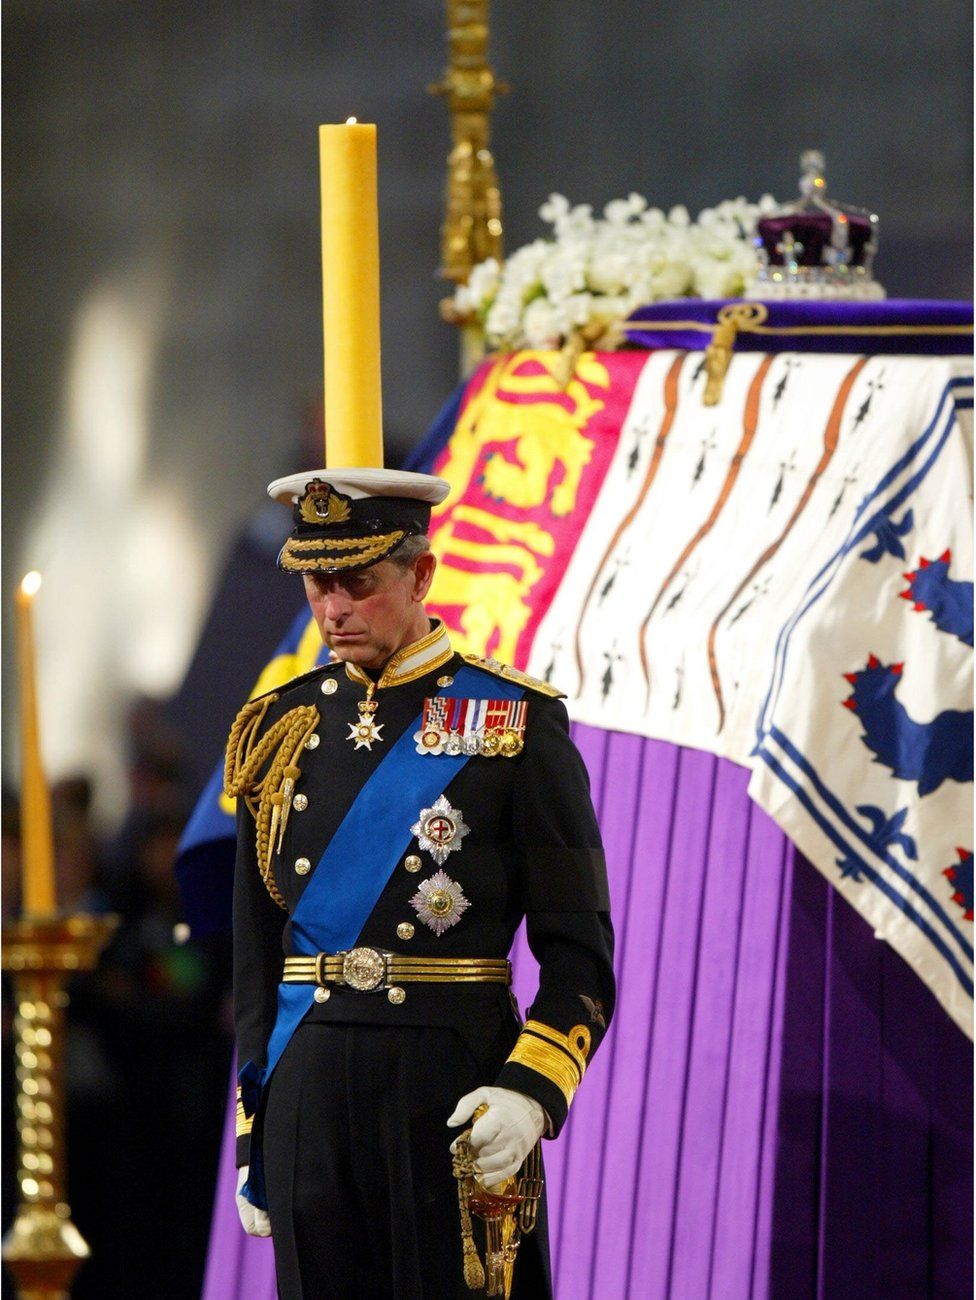 Prince of Wales standing vigil beside the Queen Mother's coffin in Westminster Hall in London